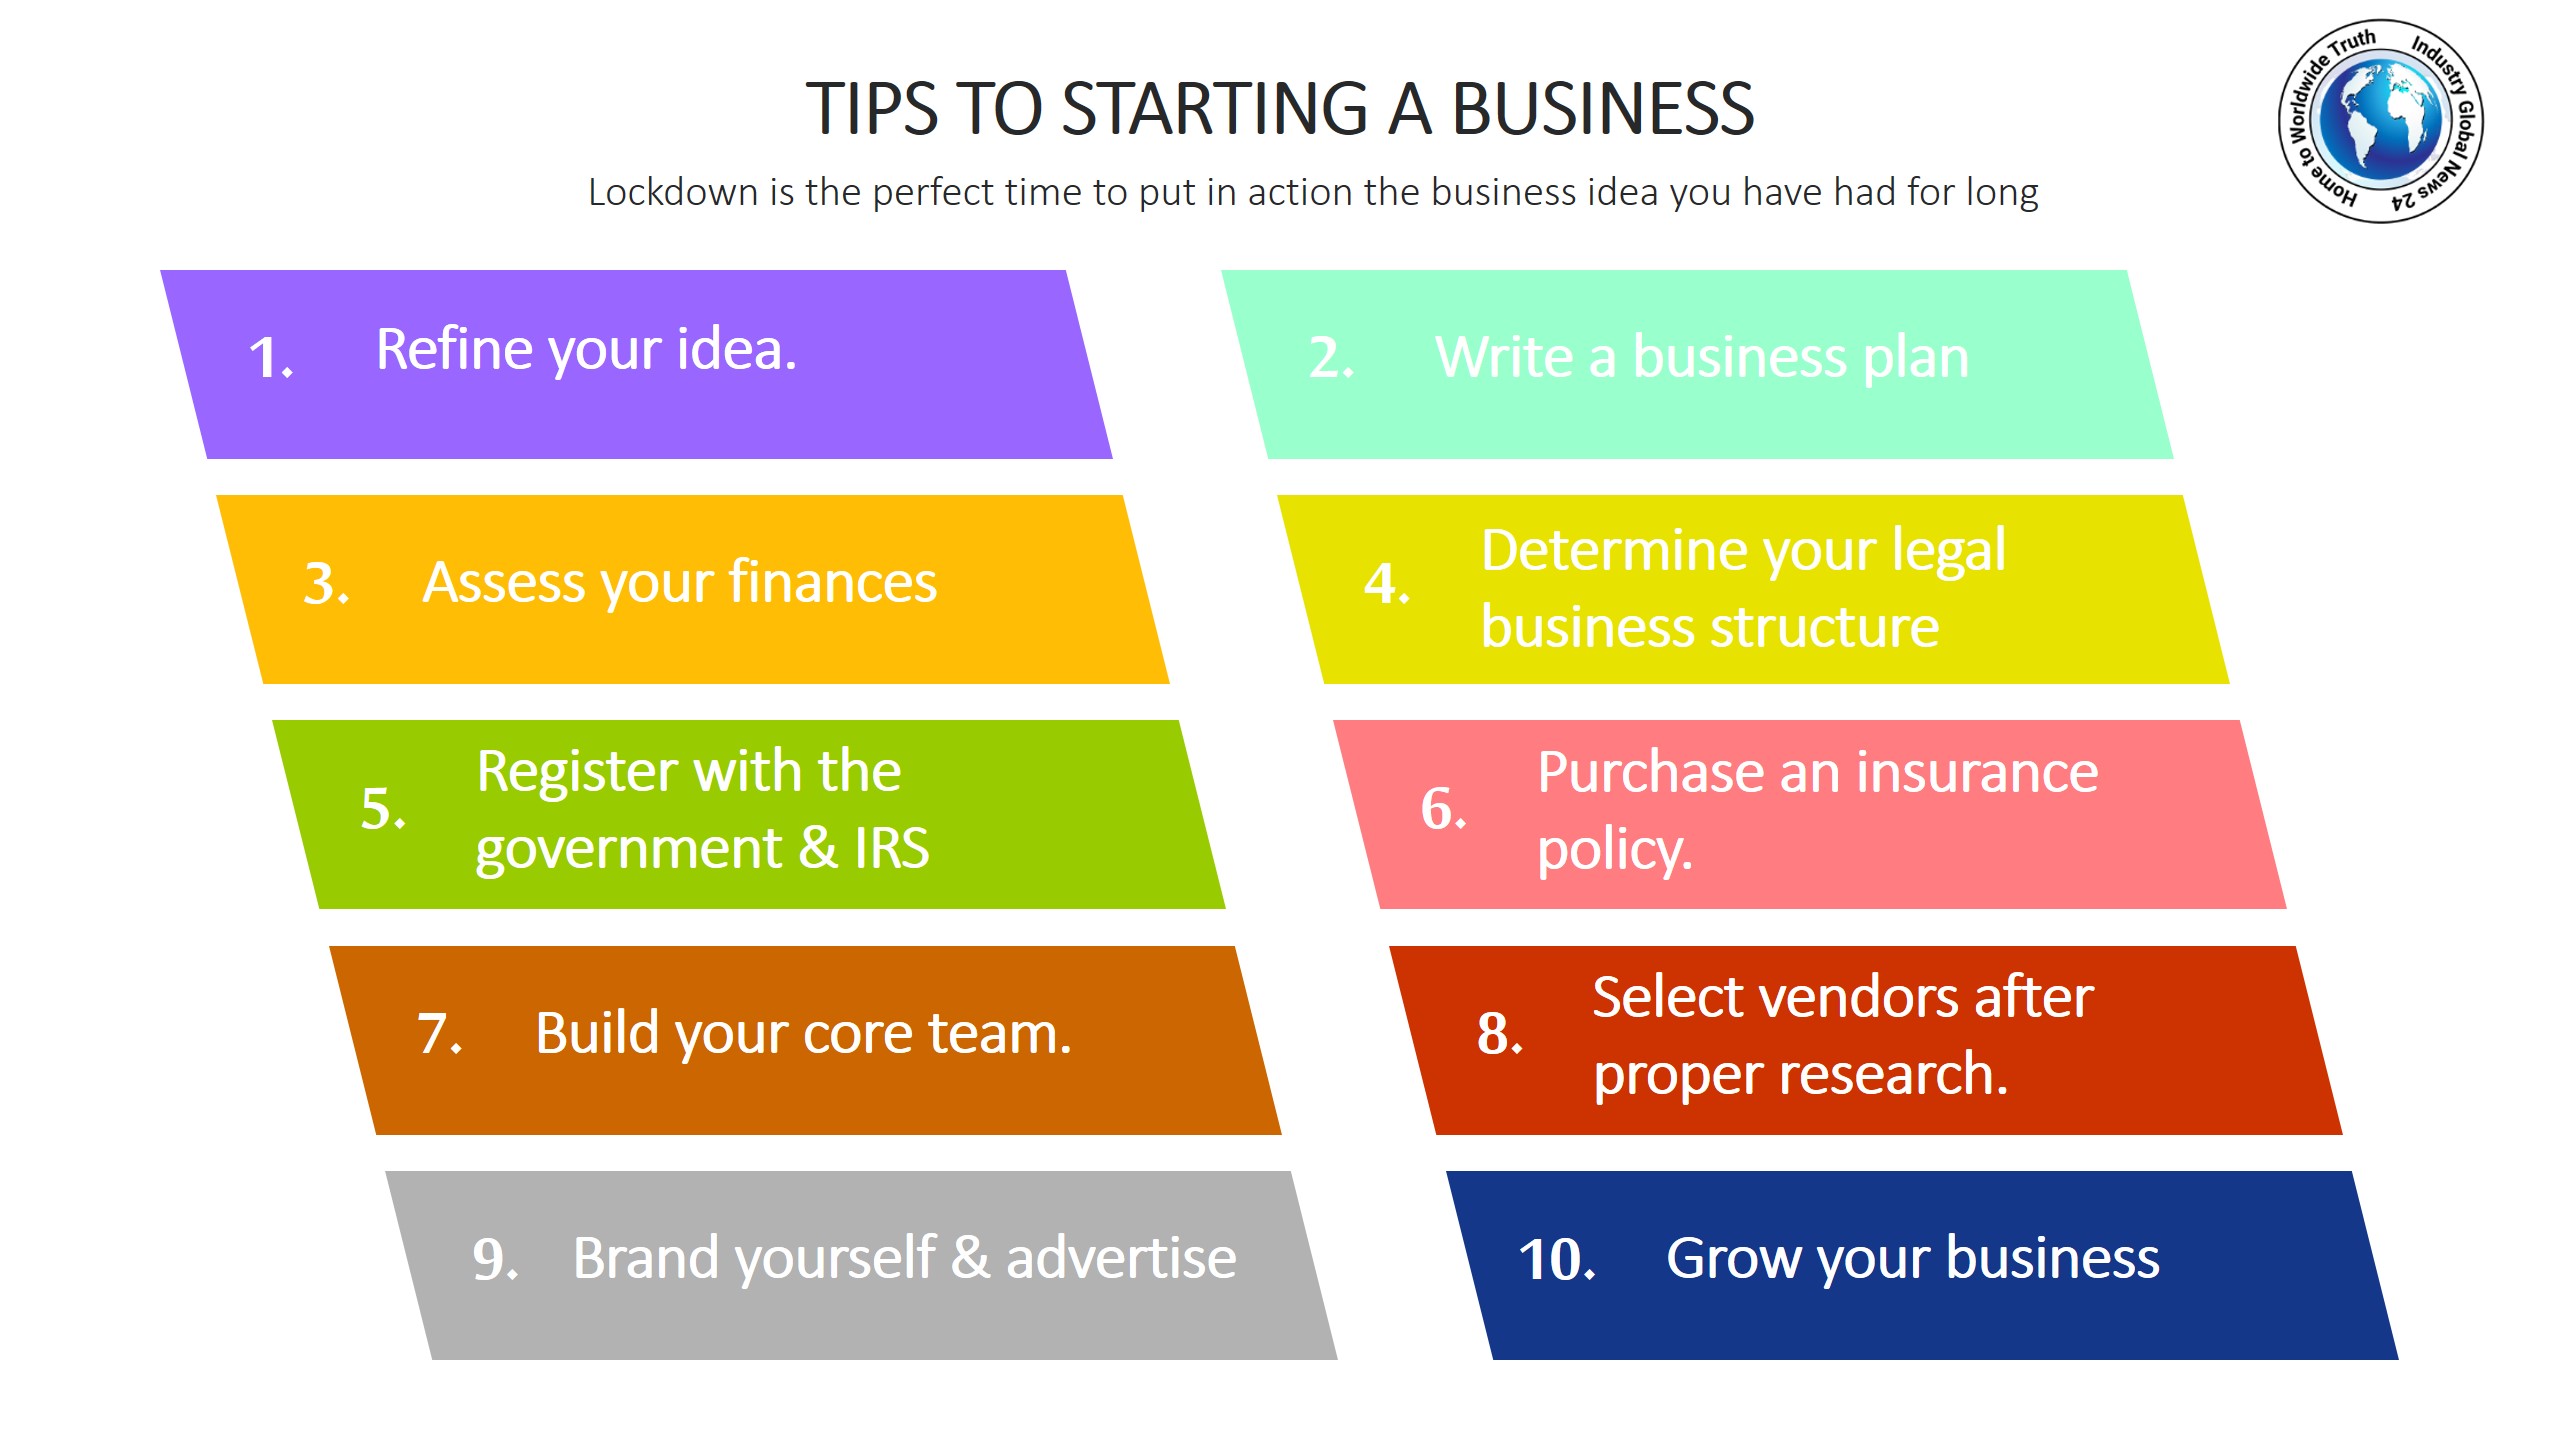 Tips to starting a business